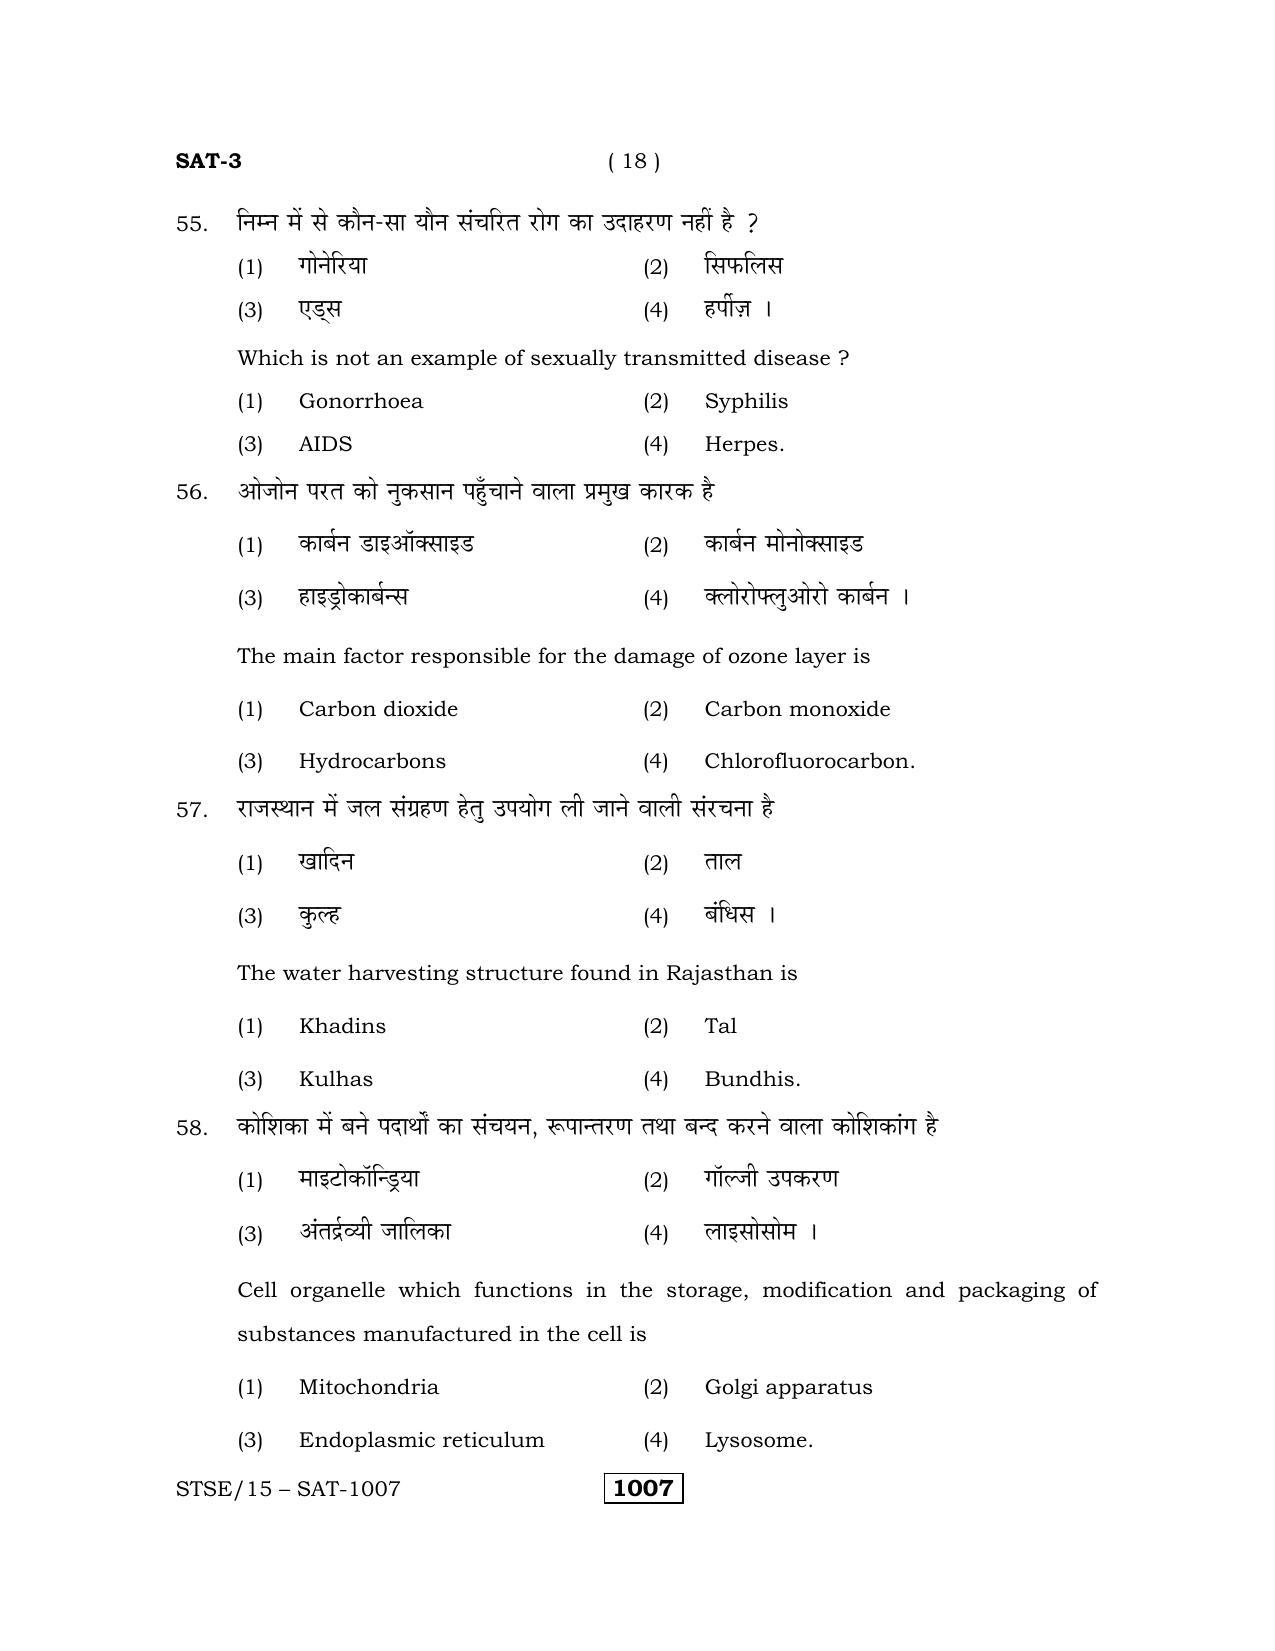 Rajasthan STSE Class 12 (Scholastic Aptitude Test) Question Paper 2015 - Page 18